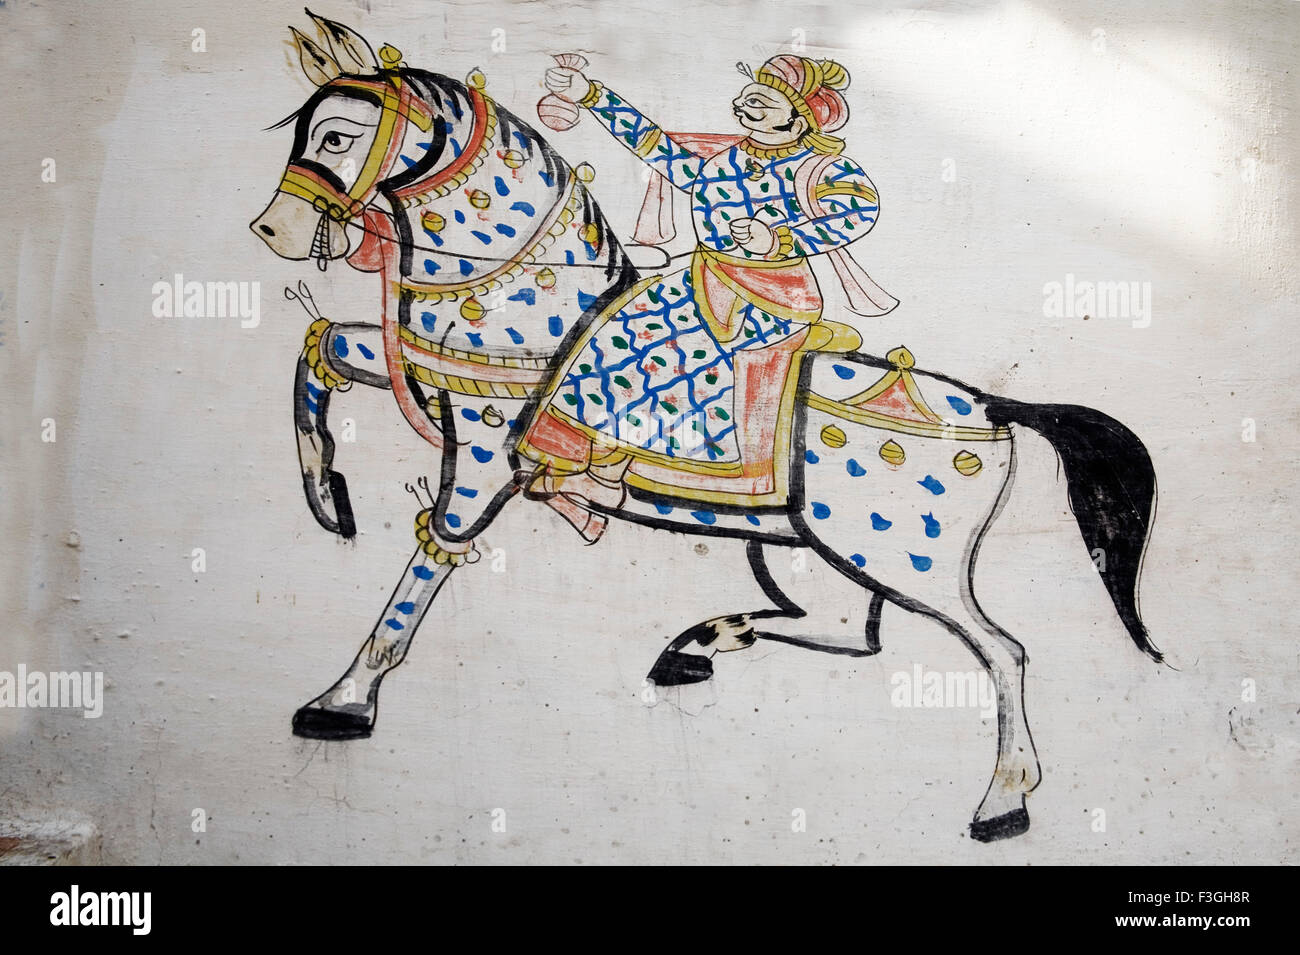 Wall painting ; man in traditional royal dress riding horse showing money bag hand Village Dilwara Udaipur Stock Photo